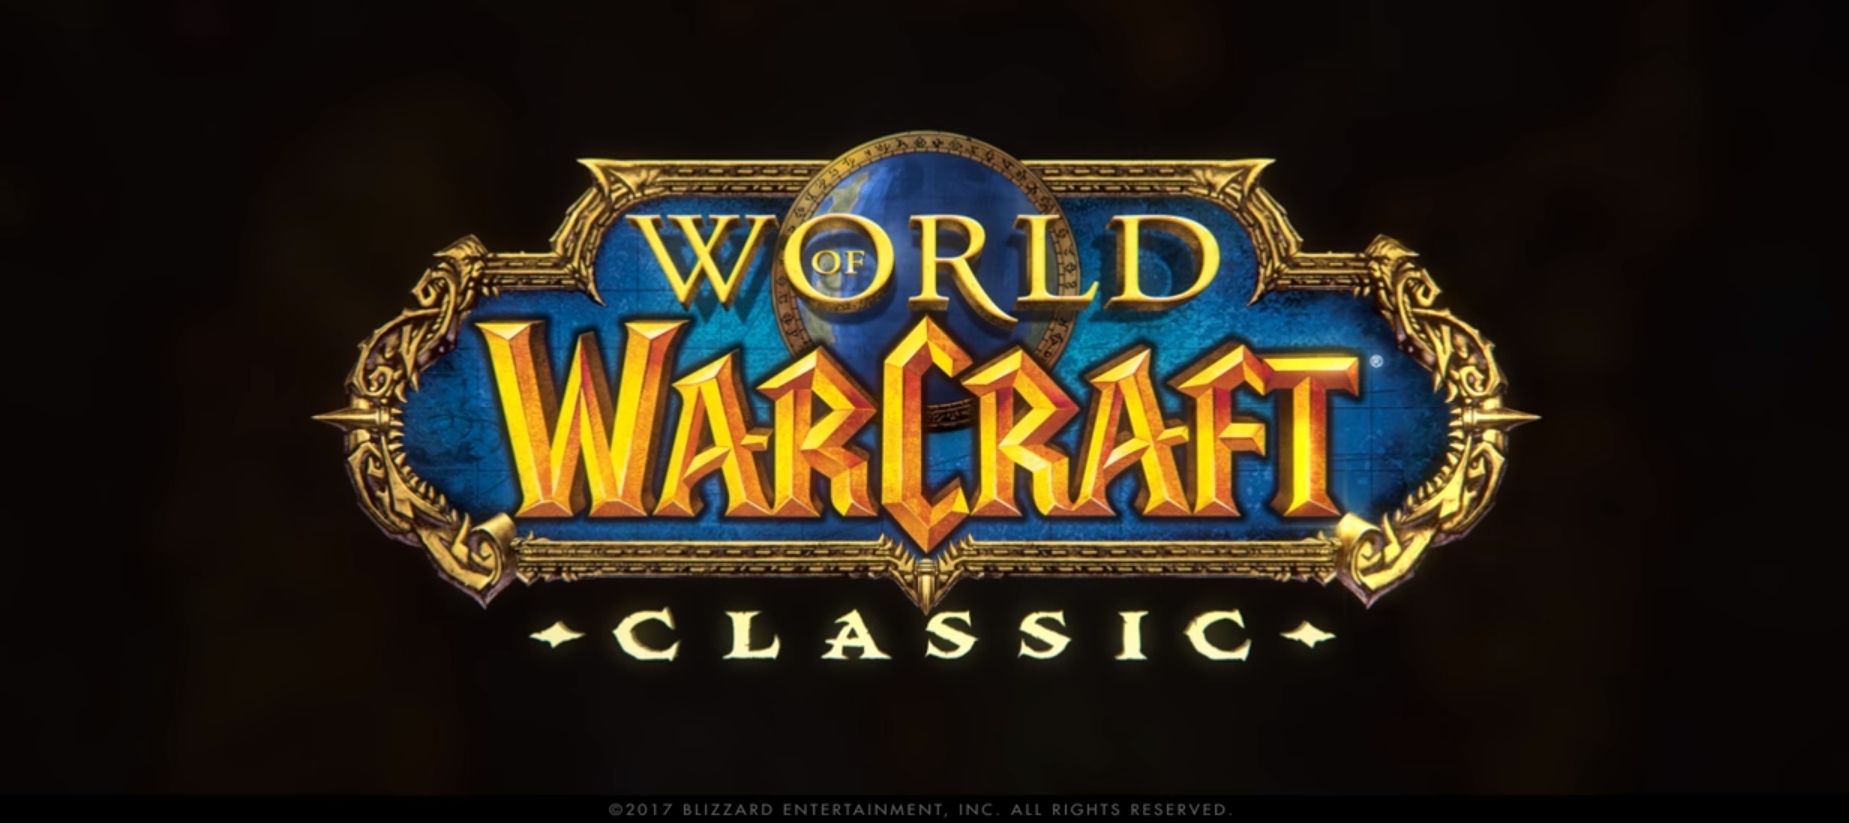 World Of Warcraft: Classic Battlegrounds Targeted For Terrain Changes, Leading Blizzard To Revert Test Changes After Unintended Consequences